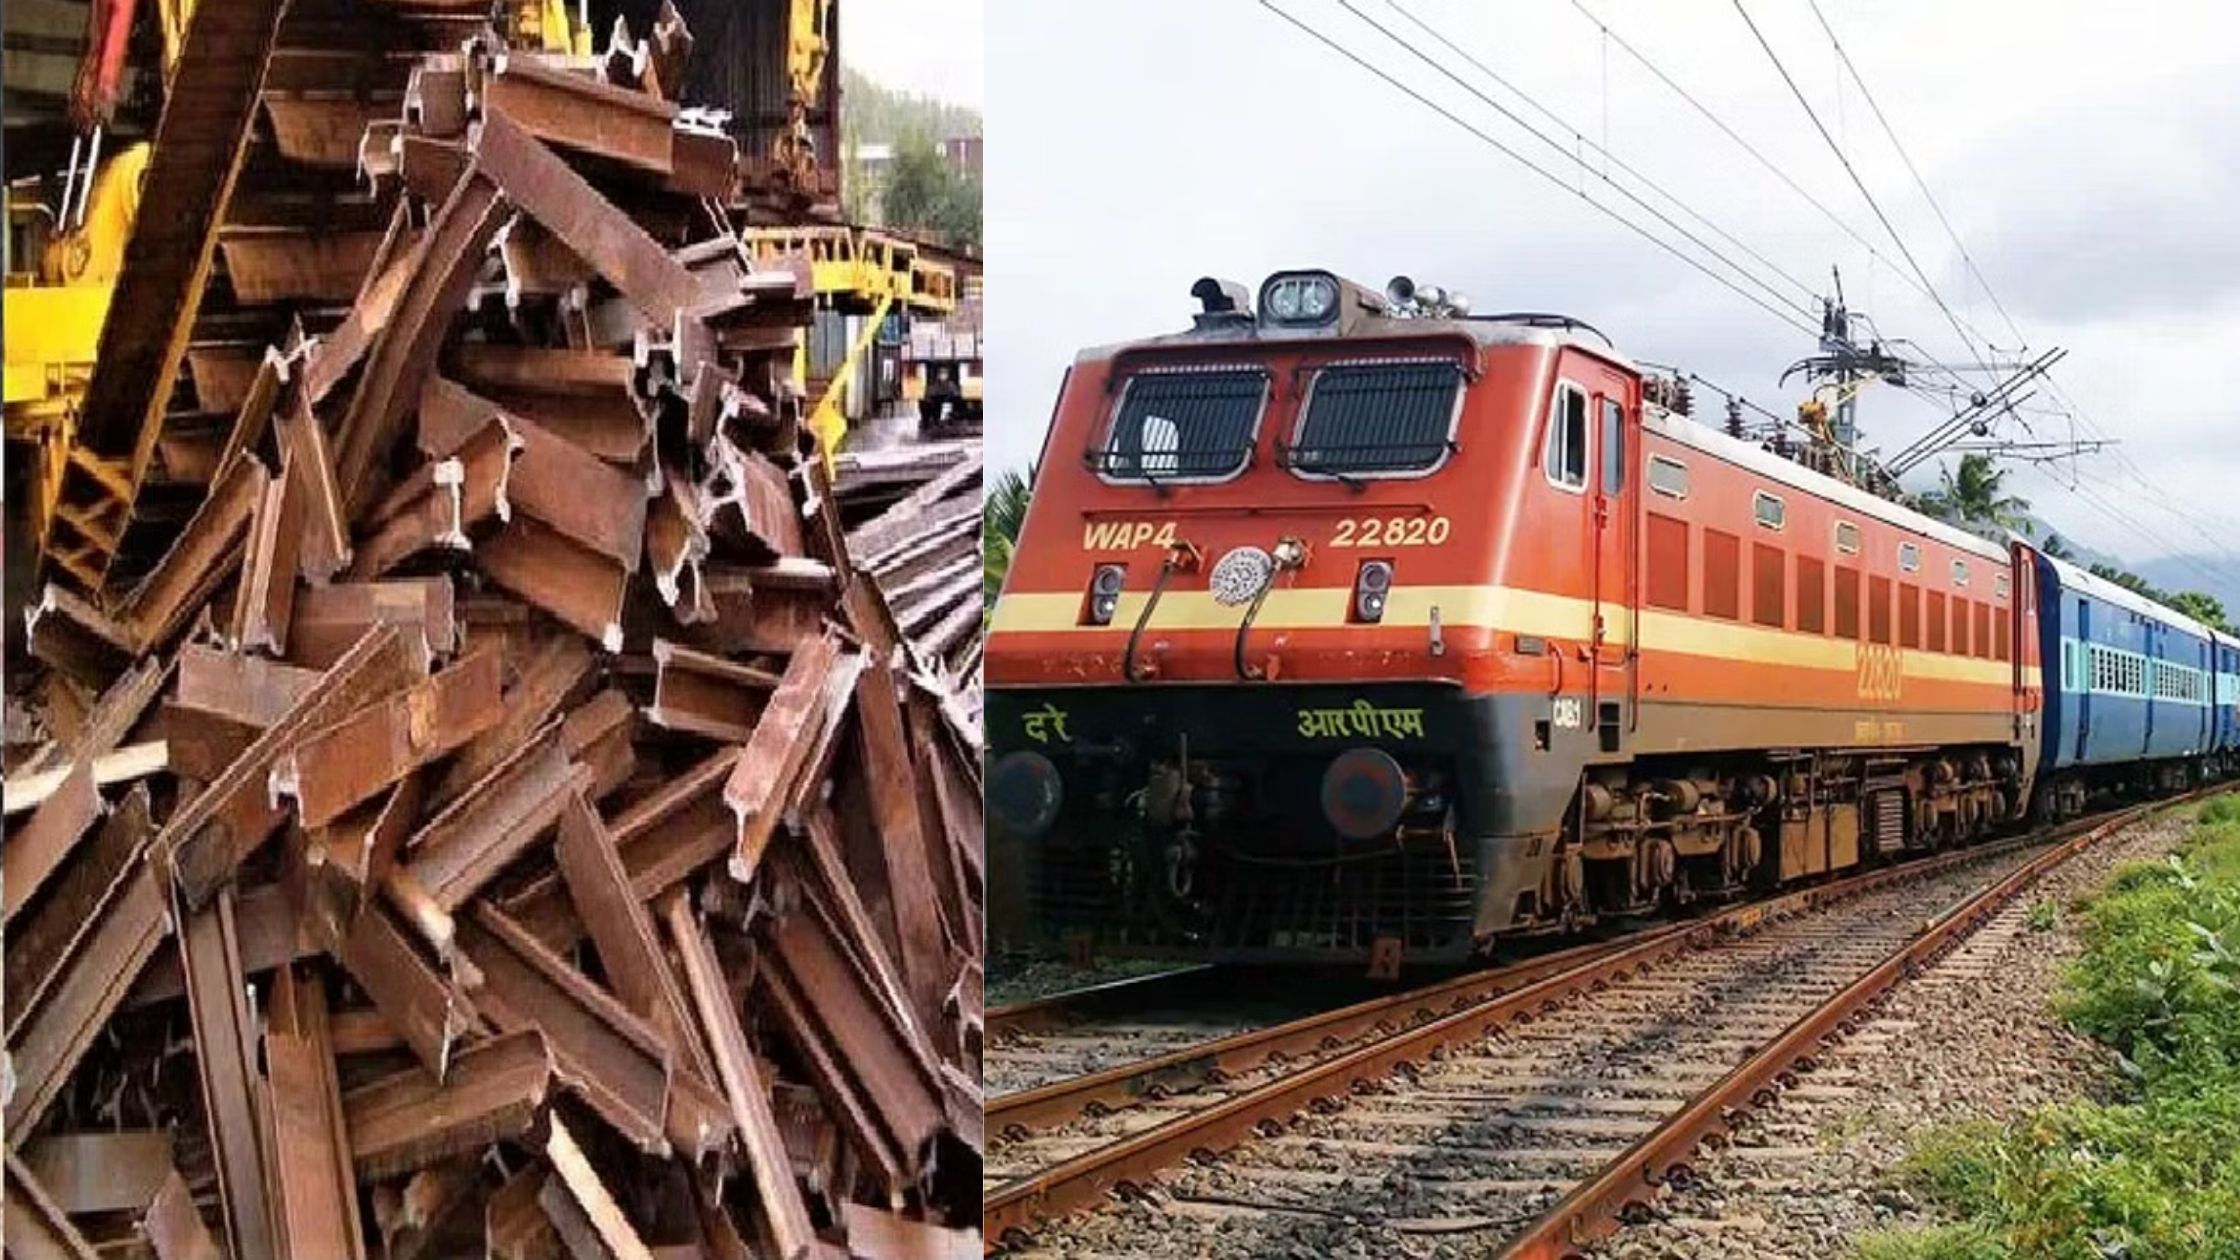 Bicycle parts are being made from railway iron